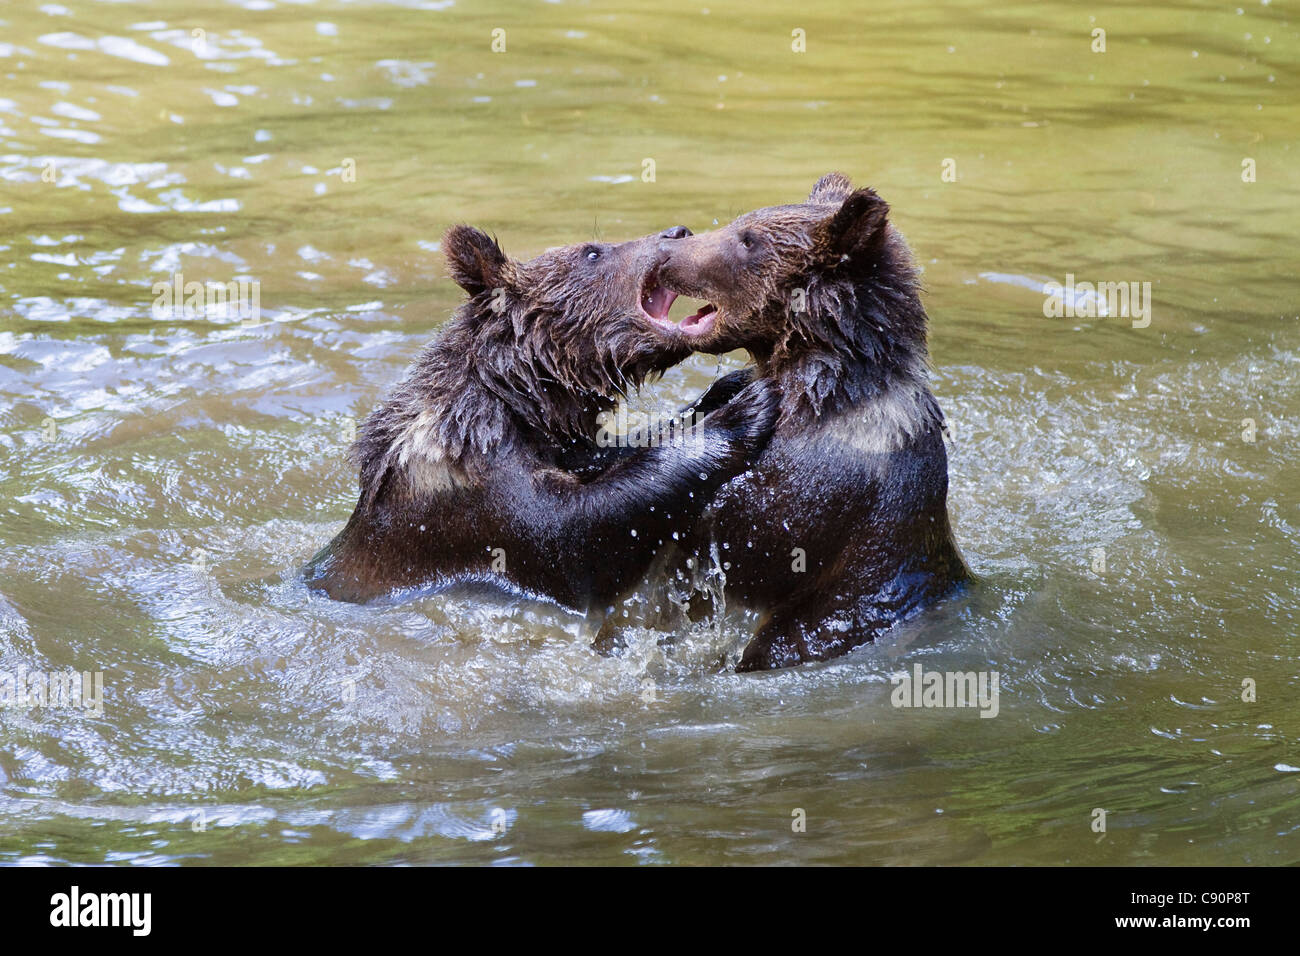 Young Brown Bears playing in water, Ursus arctos, Bavarian Forest National Park, Bavaria, Lower Bavaria, Germany, Europe Stock Photo